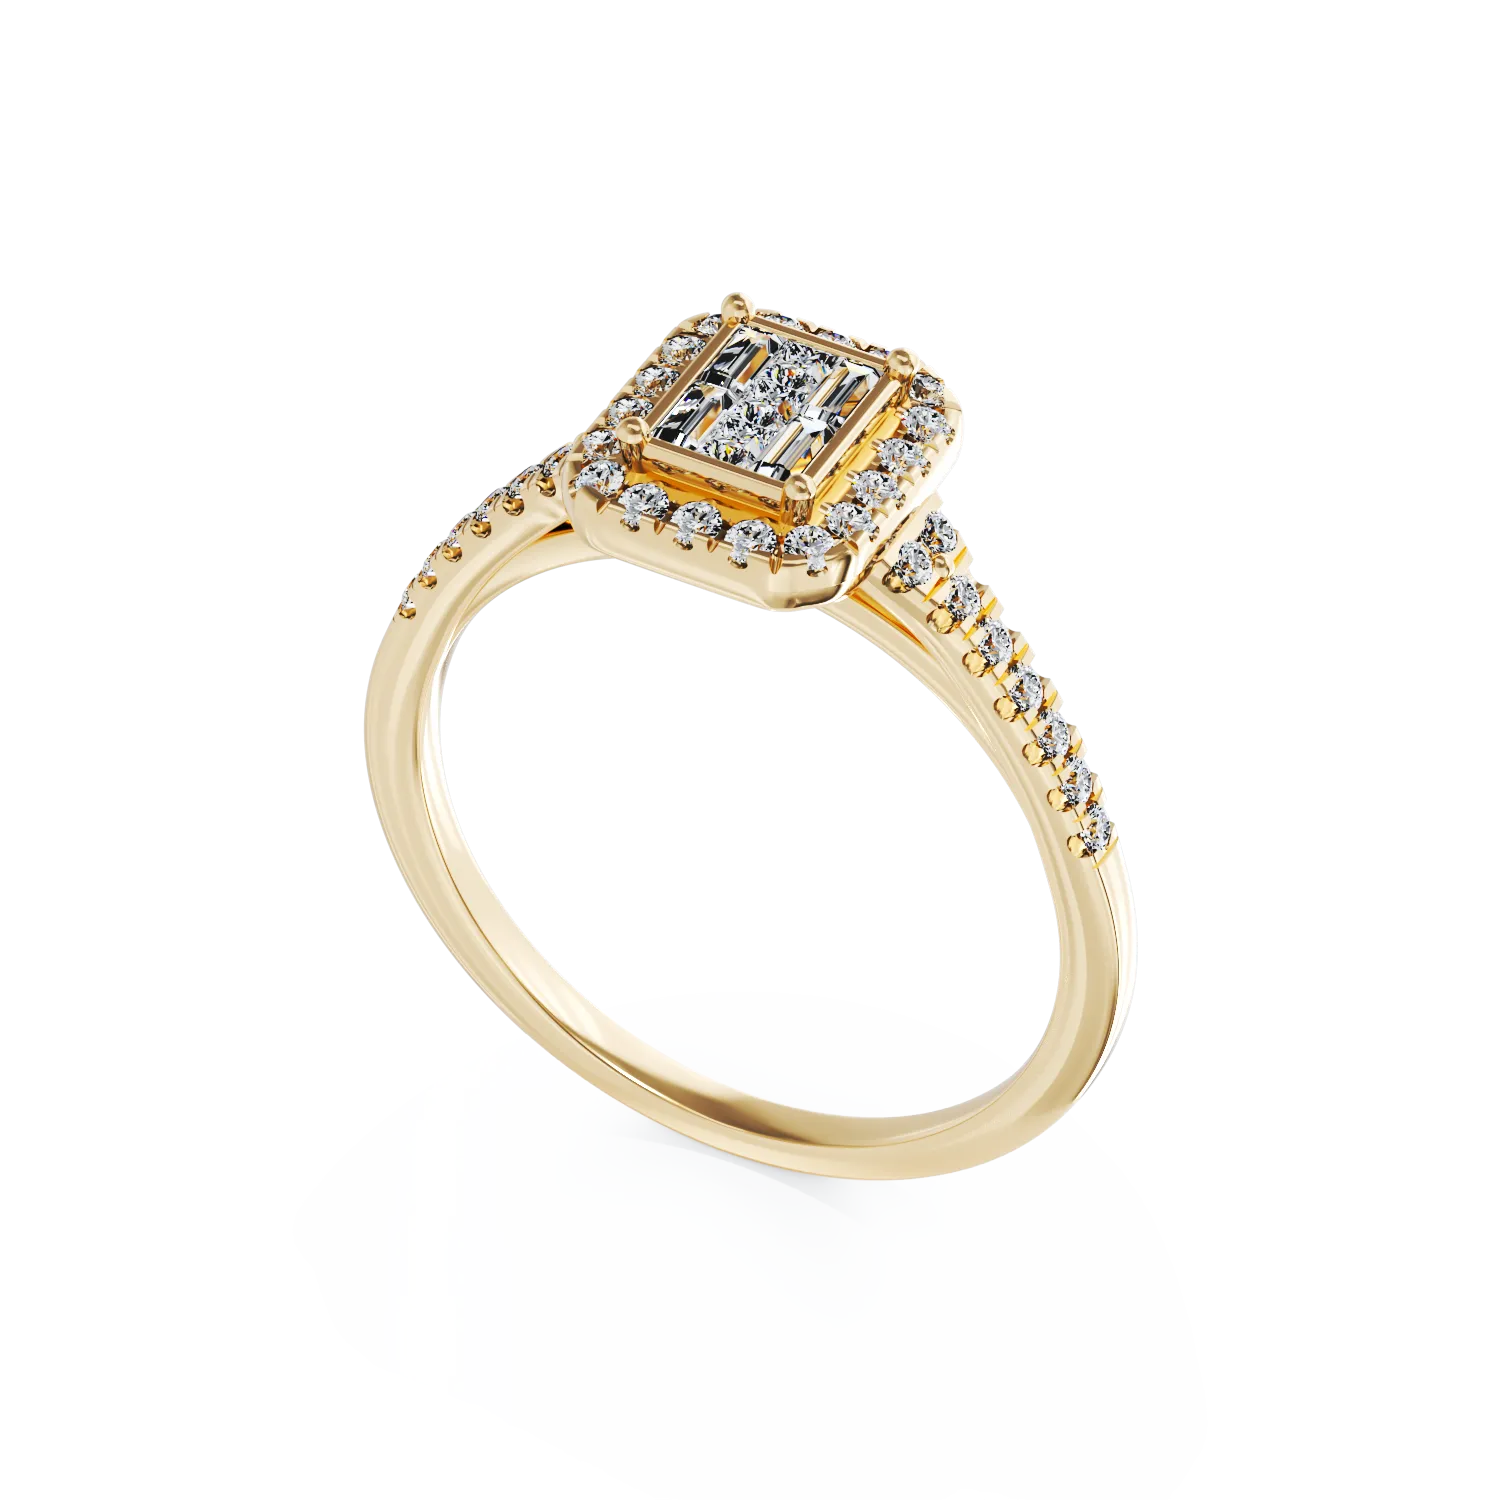 18K yellow gold engagement ring with 0.37ct diamonds